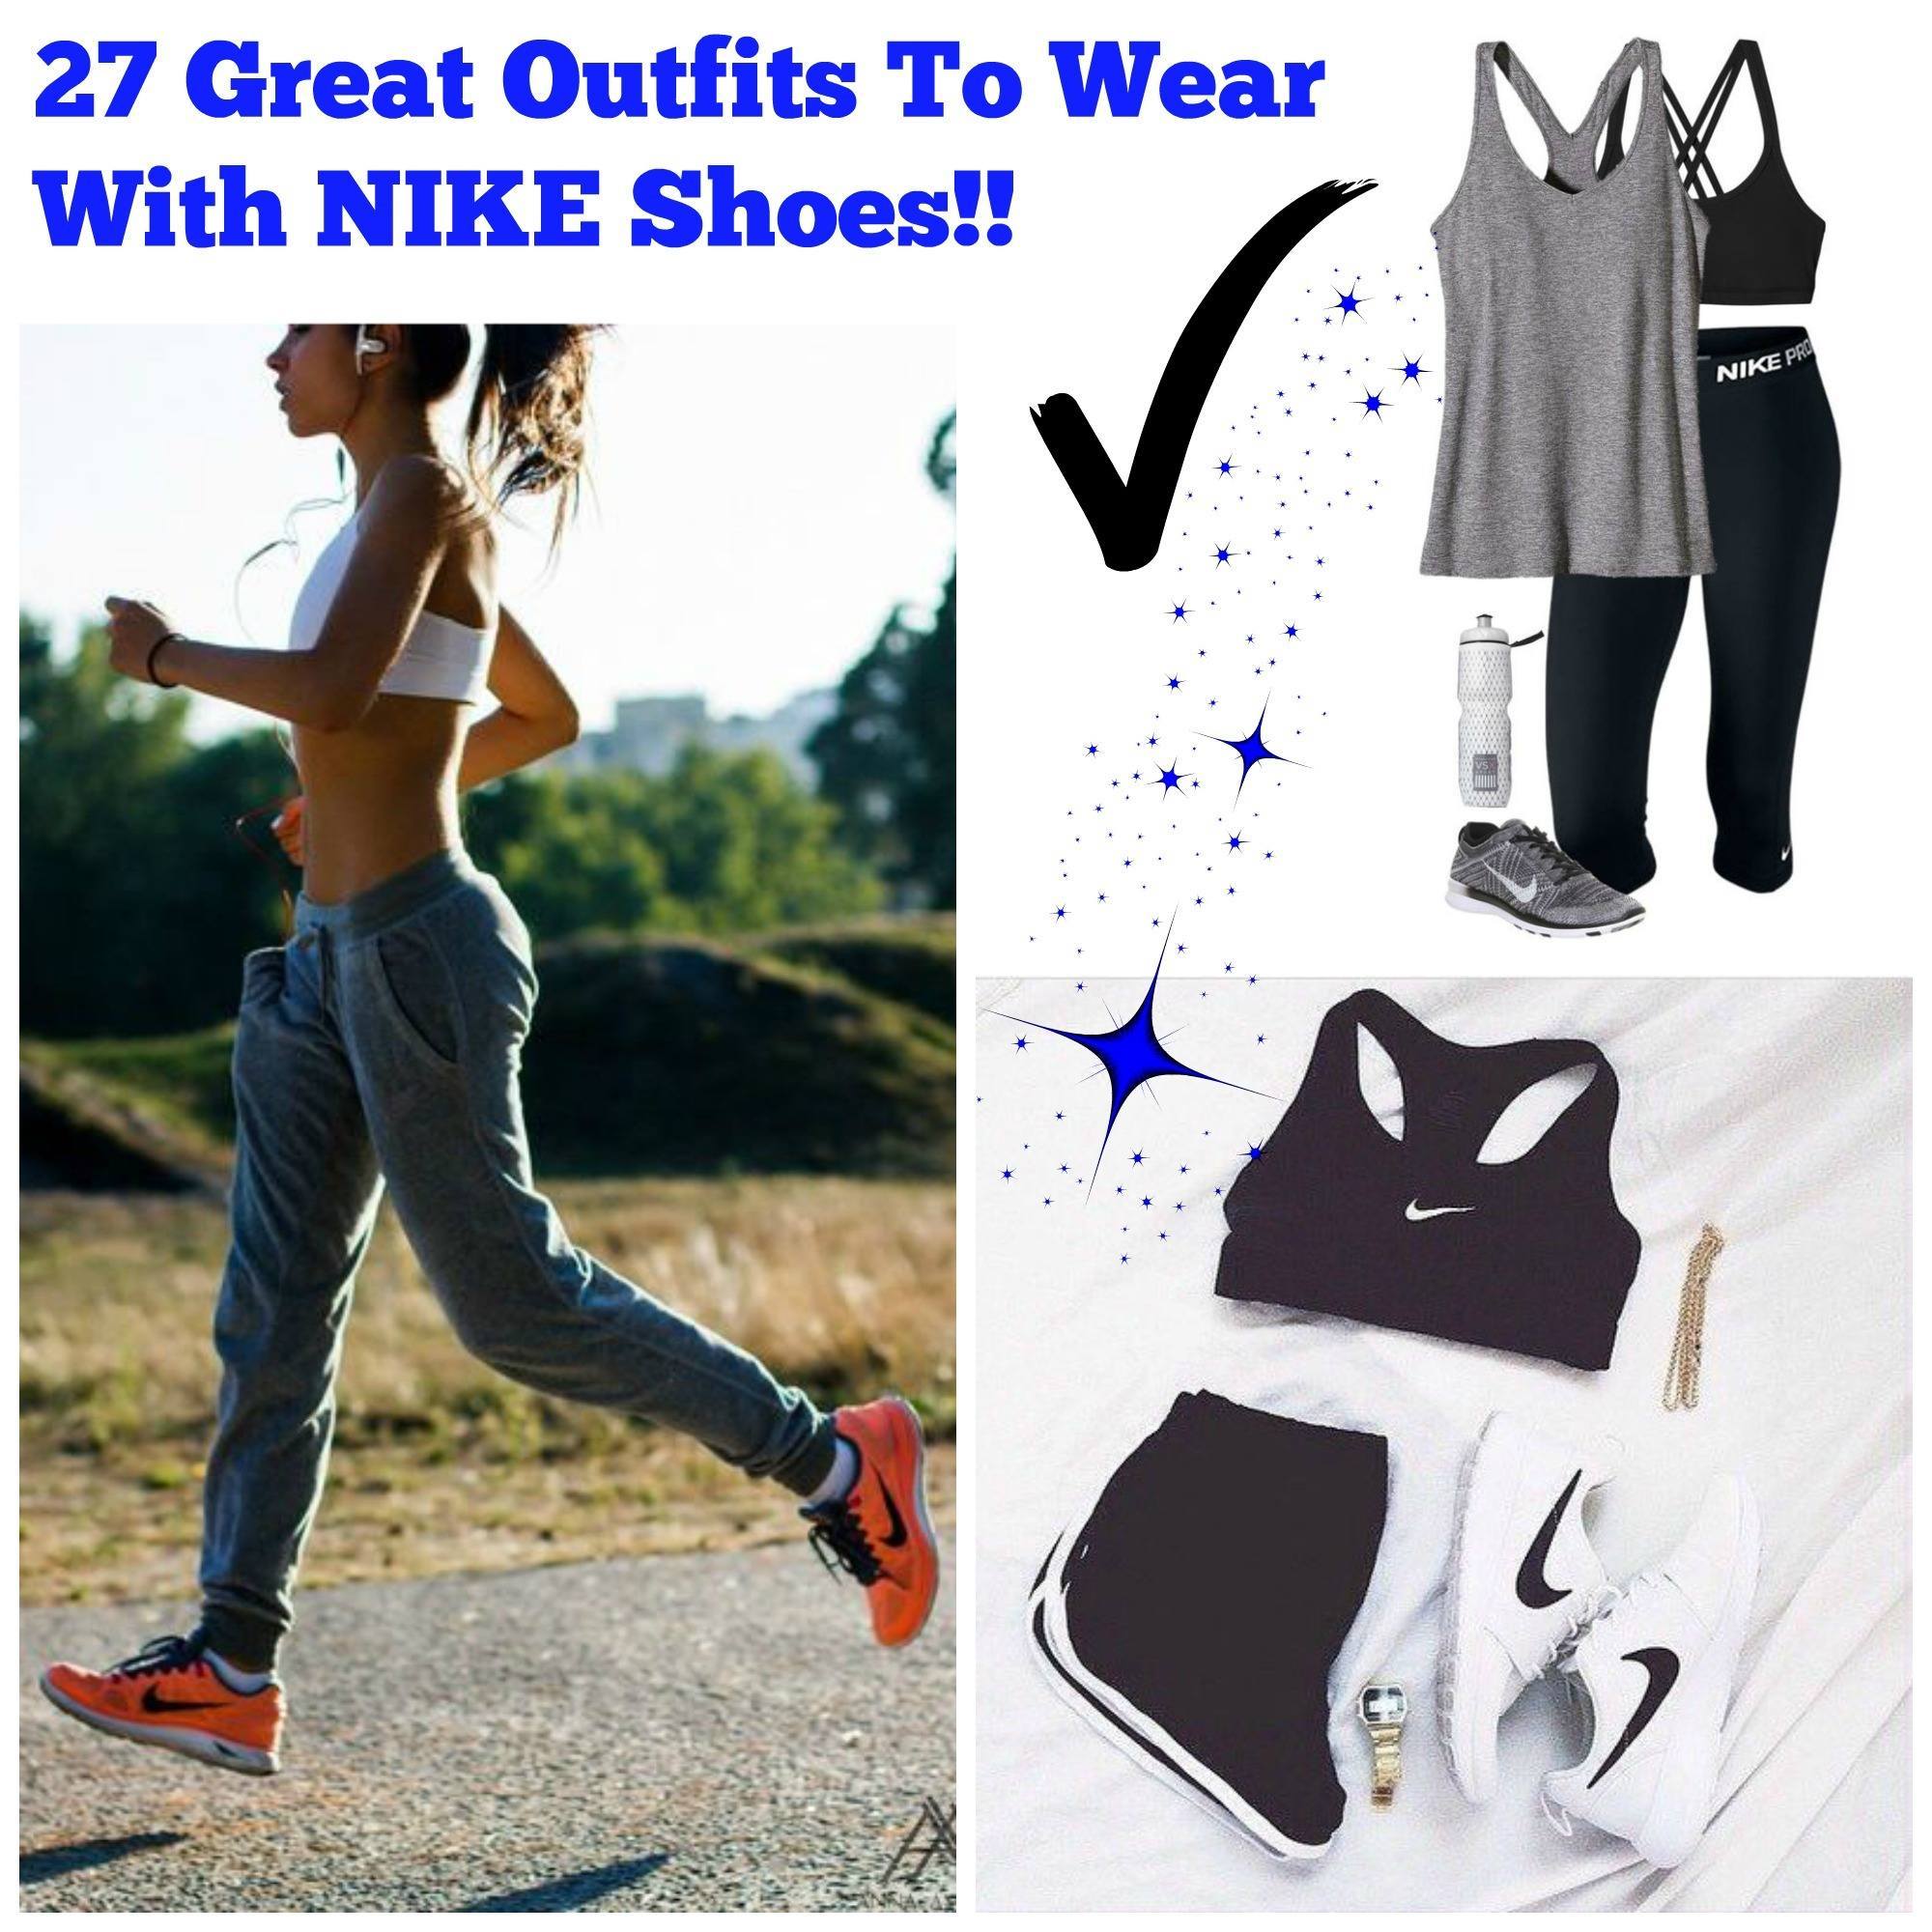 Cute Outfits With Nike Shoes – 27 Ways To Style Nike Shoes